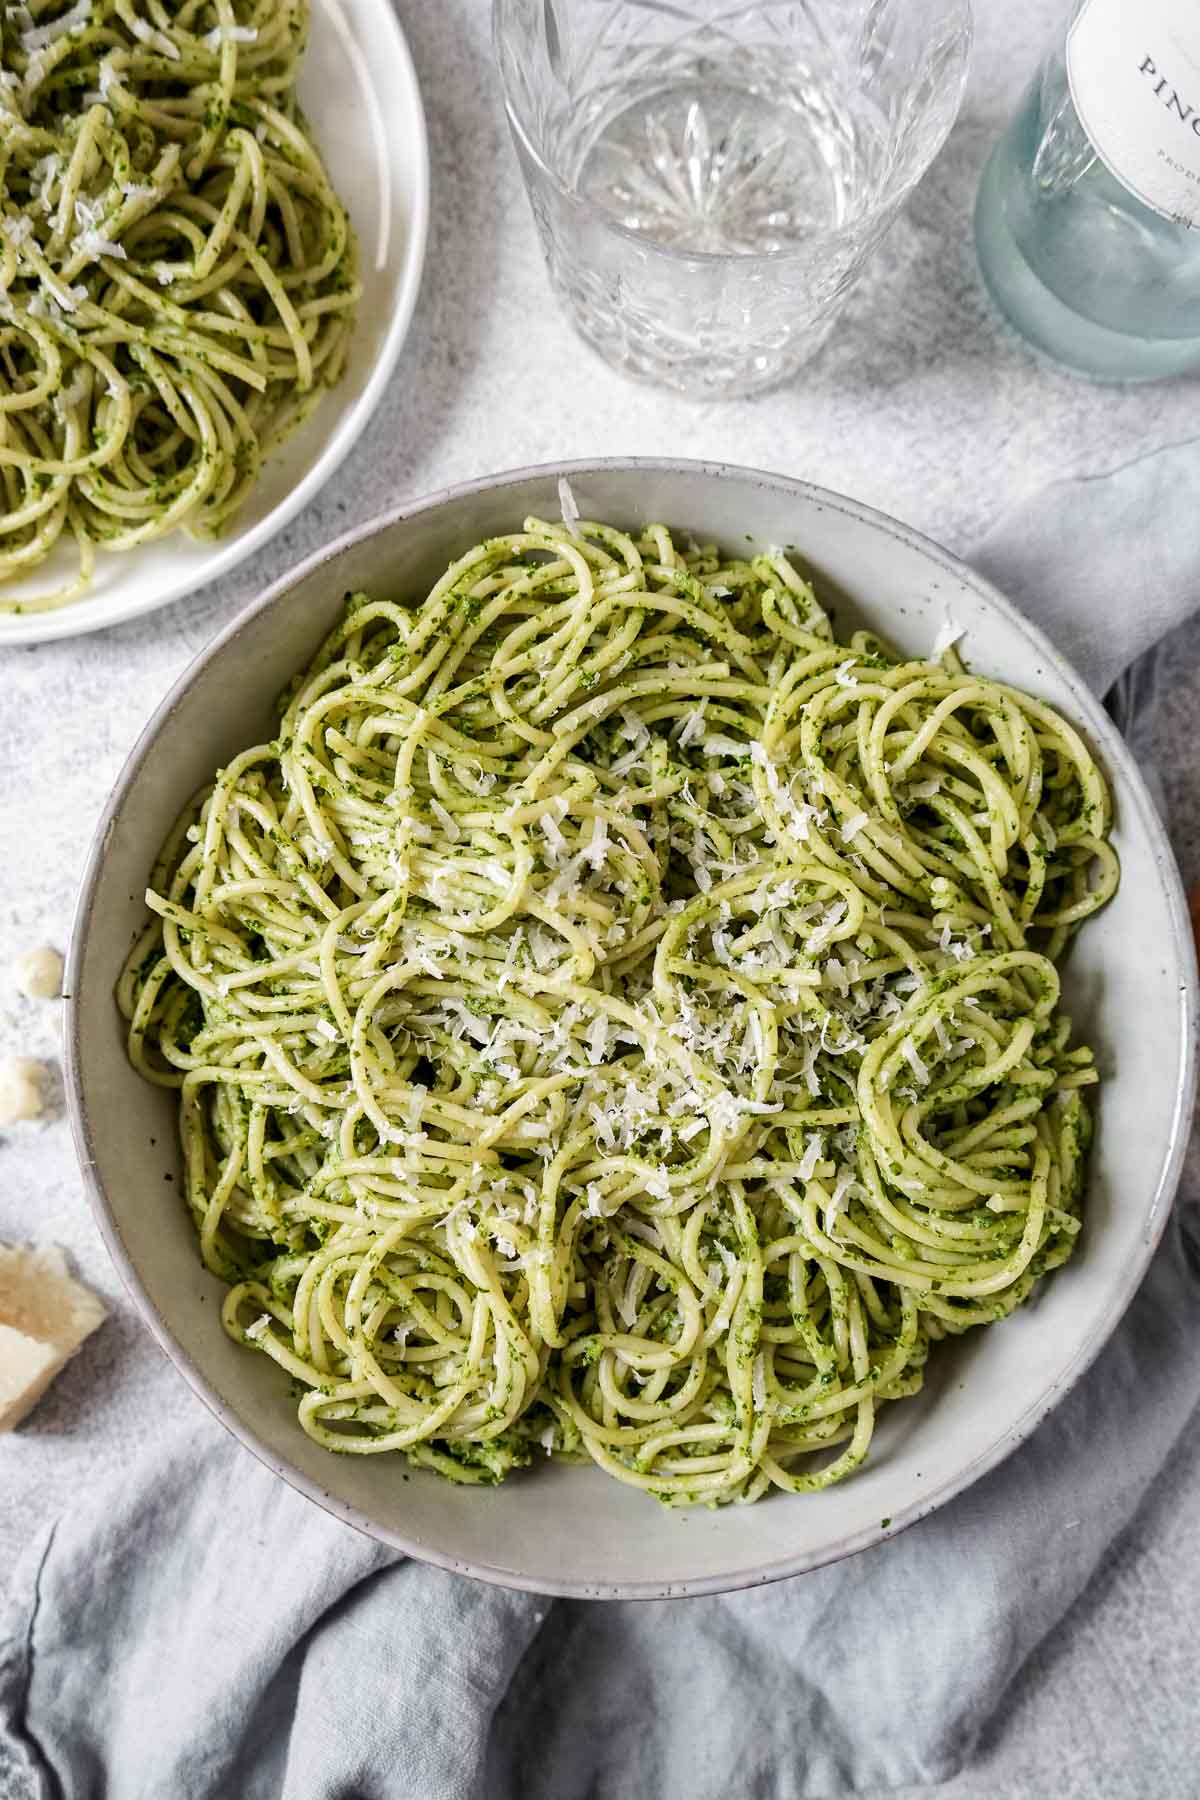 A large bowl of pasta with green sauce sprinkled with Parmesan cheese.